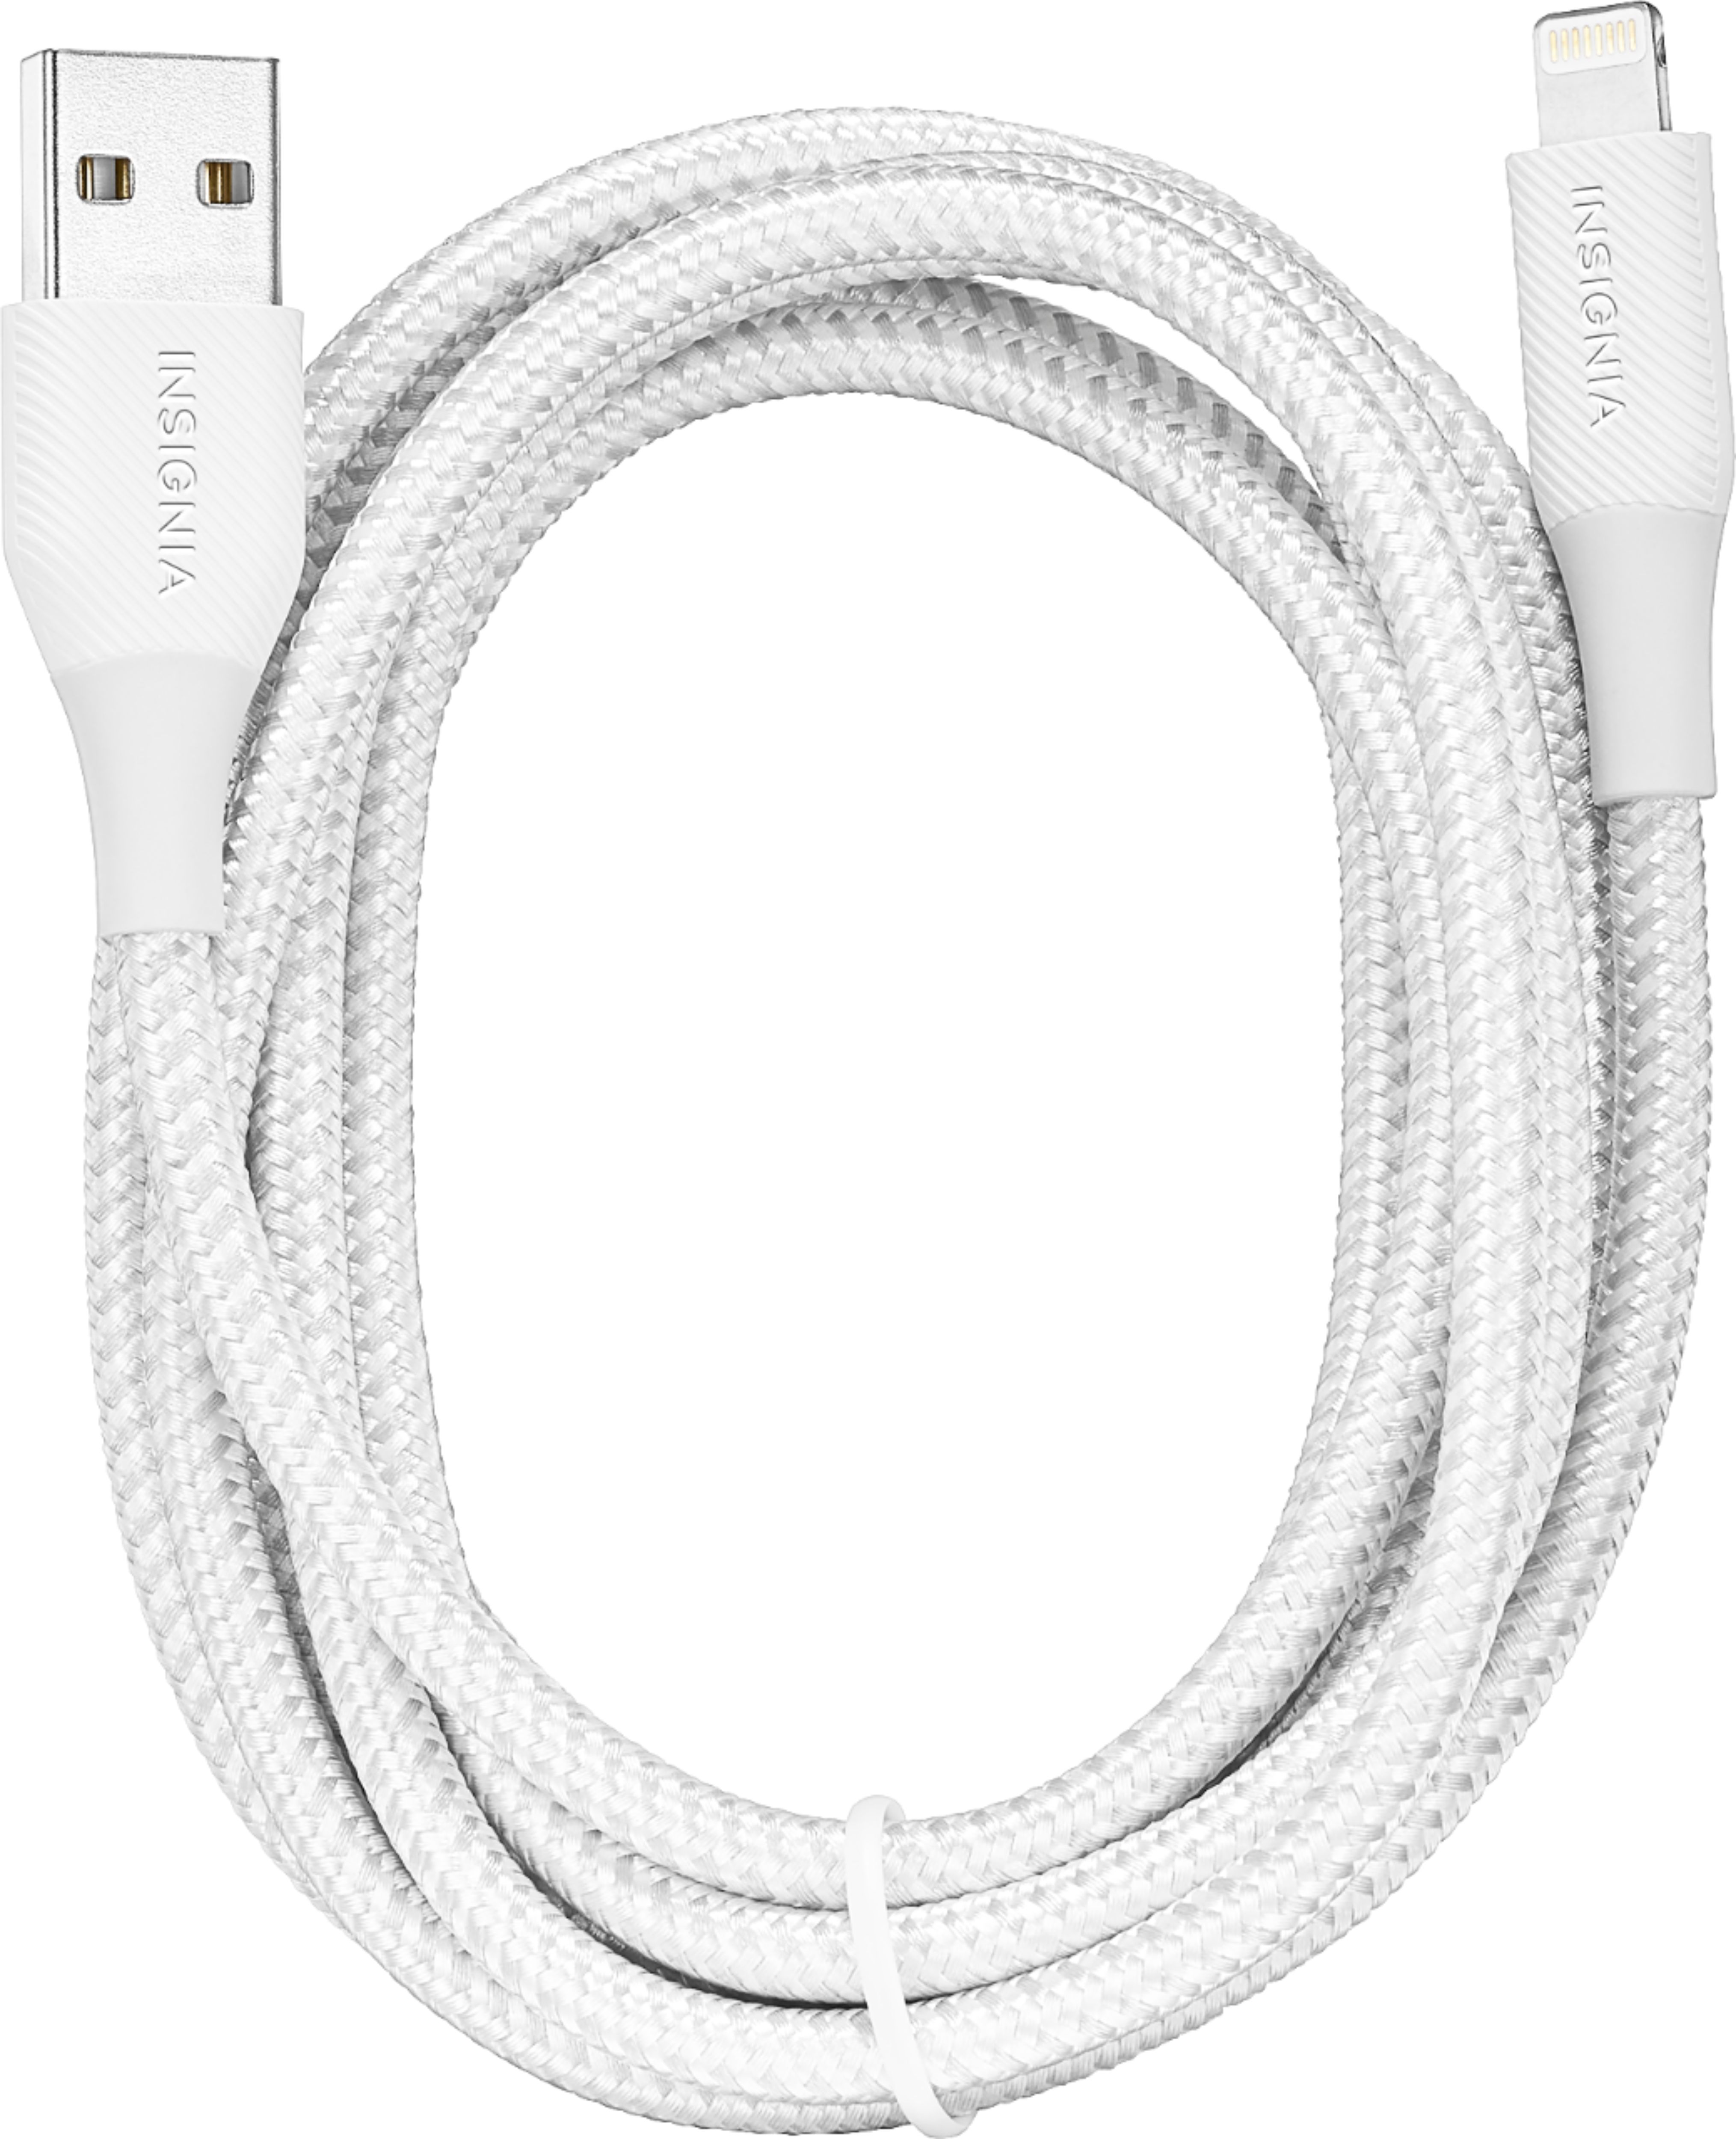 Best Buy: Insignia™ Apple MFi Certified 6 Lightning Charge-and-Sync Cable  White NS-A5SC96W